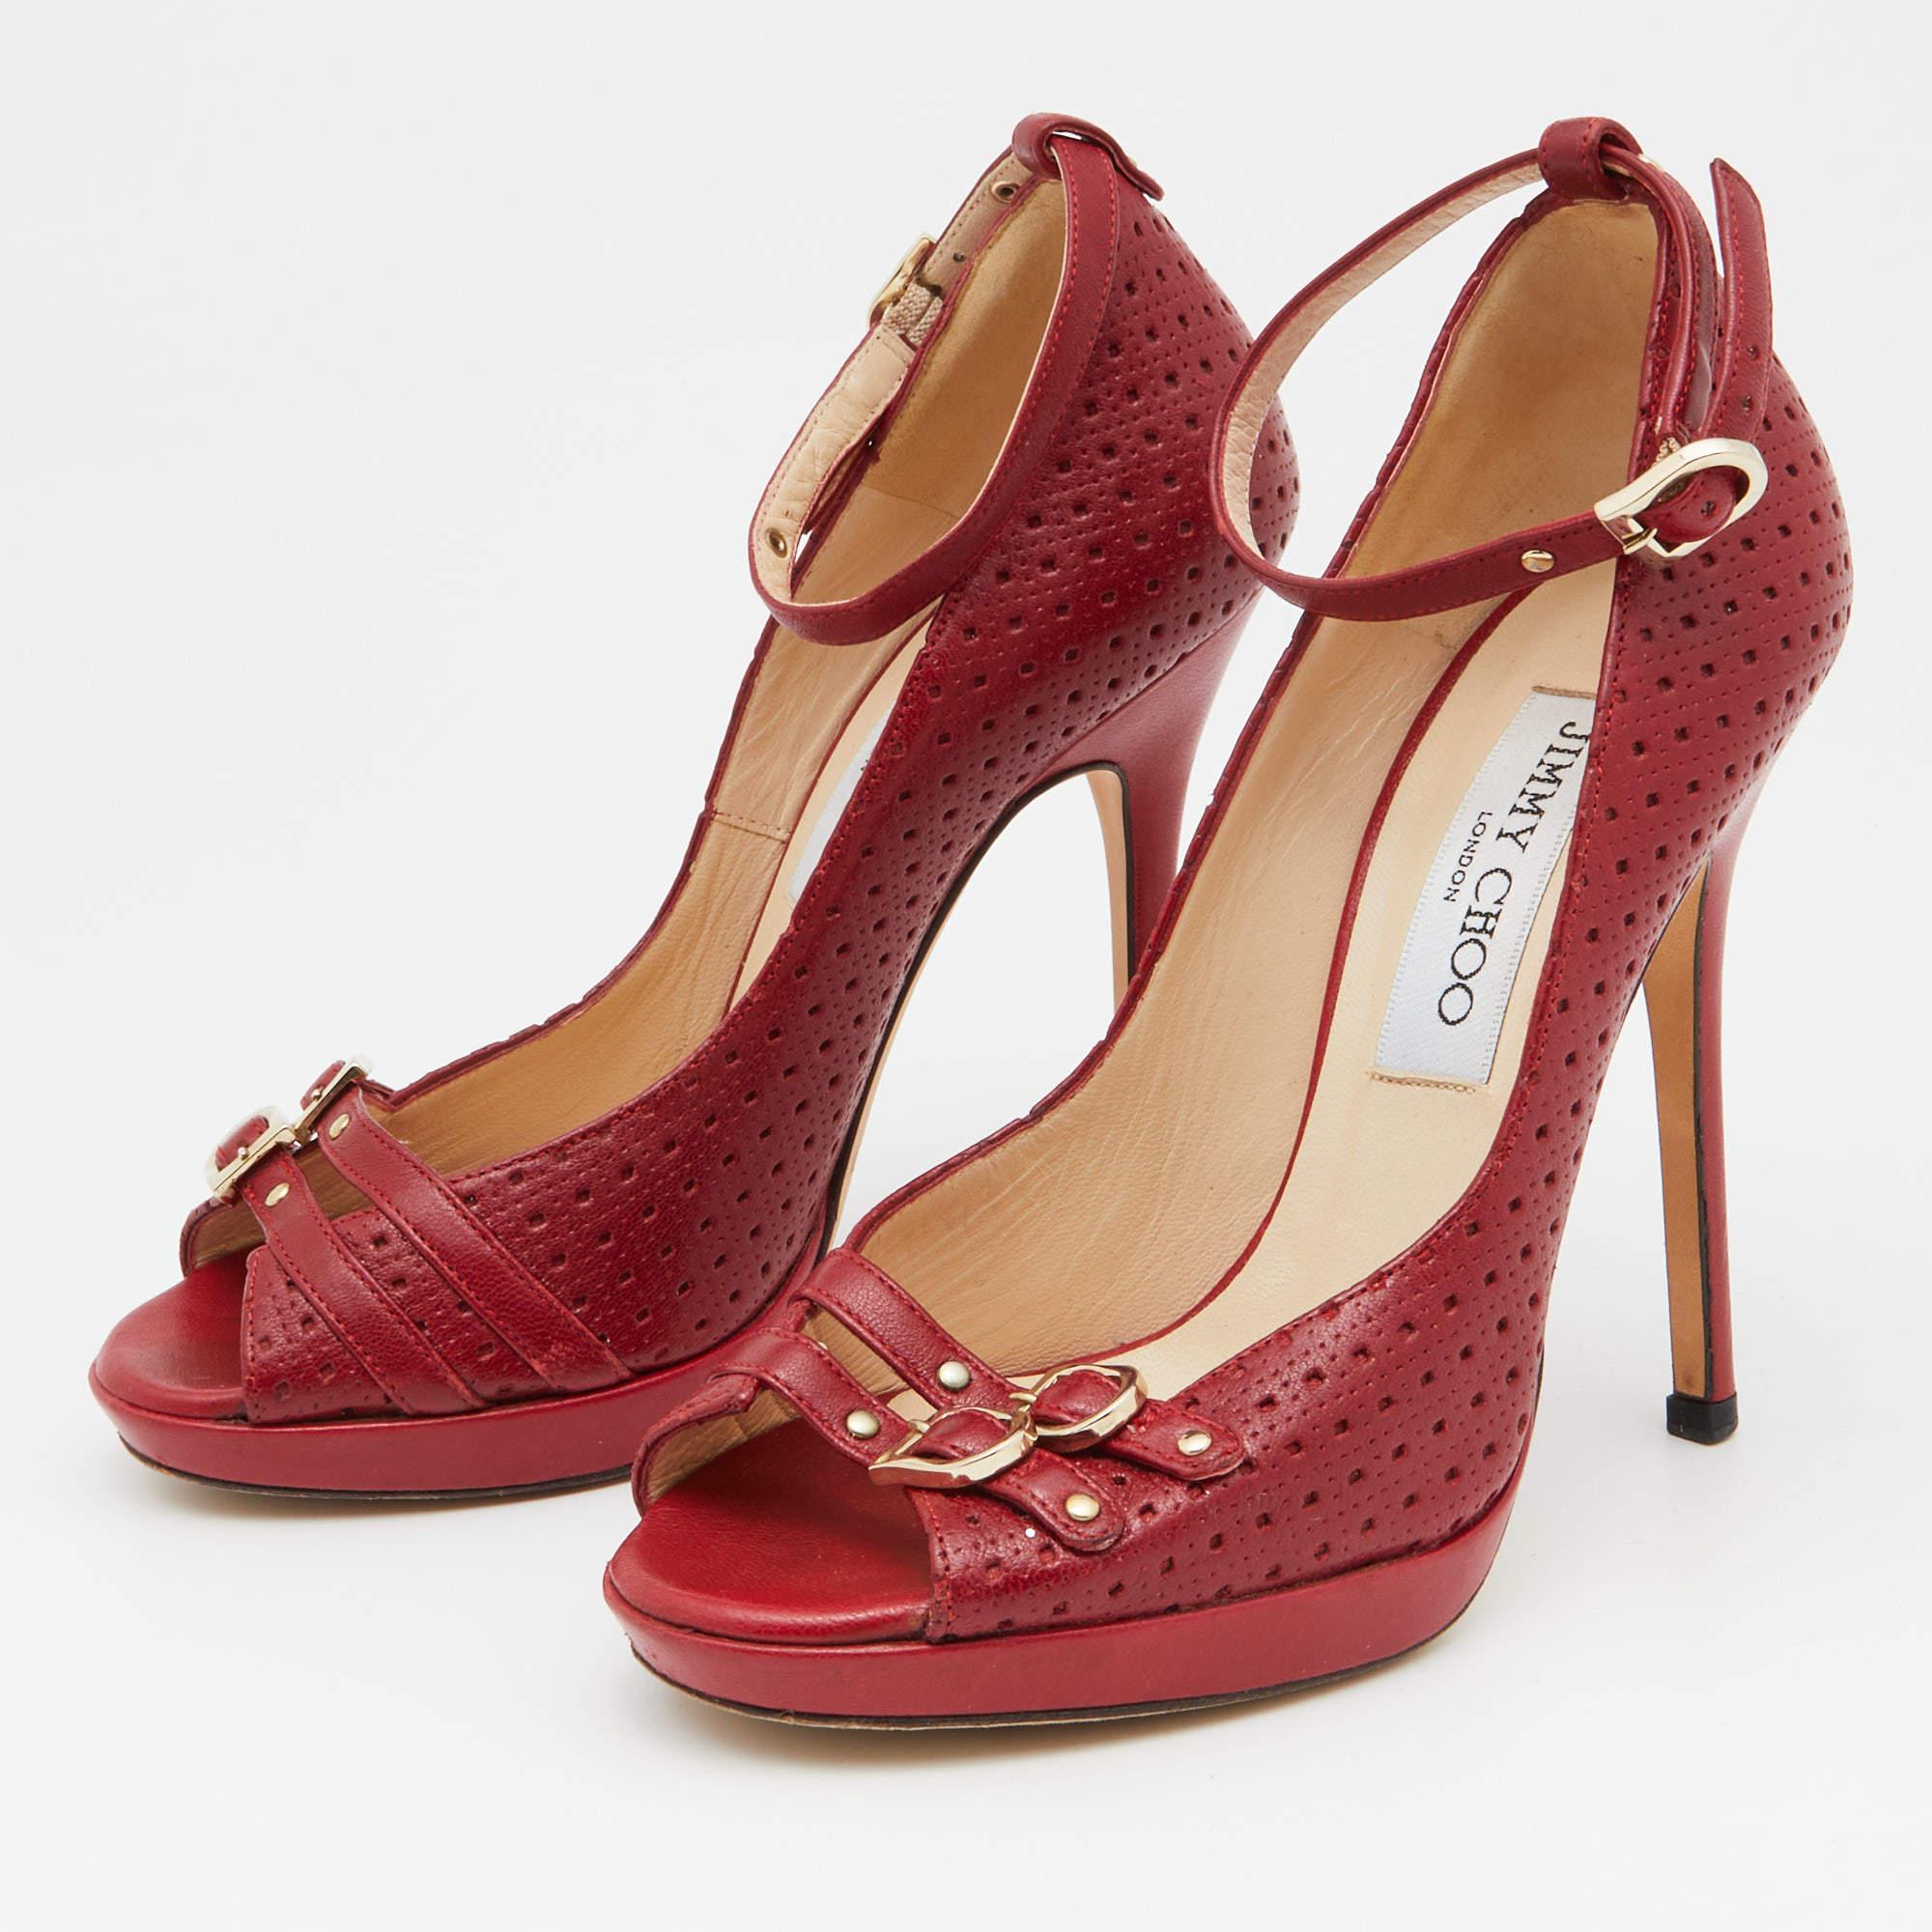 Jimmy Choo Red Perforated Leather Peep Toe Pumps Size 35 2